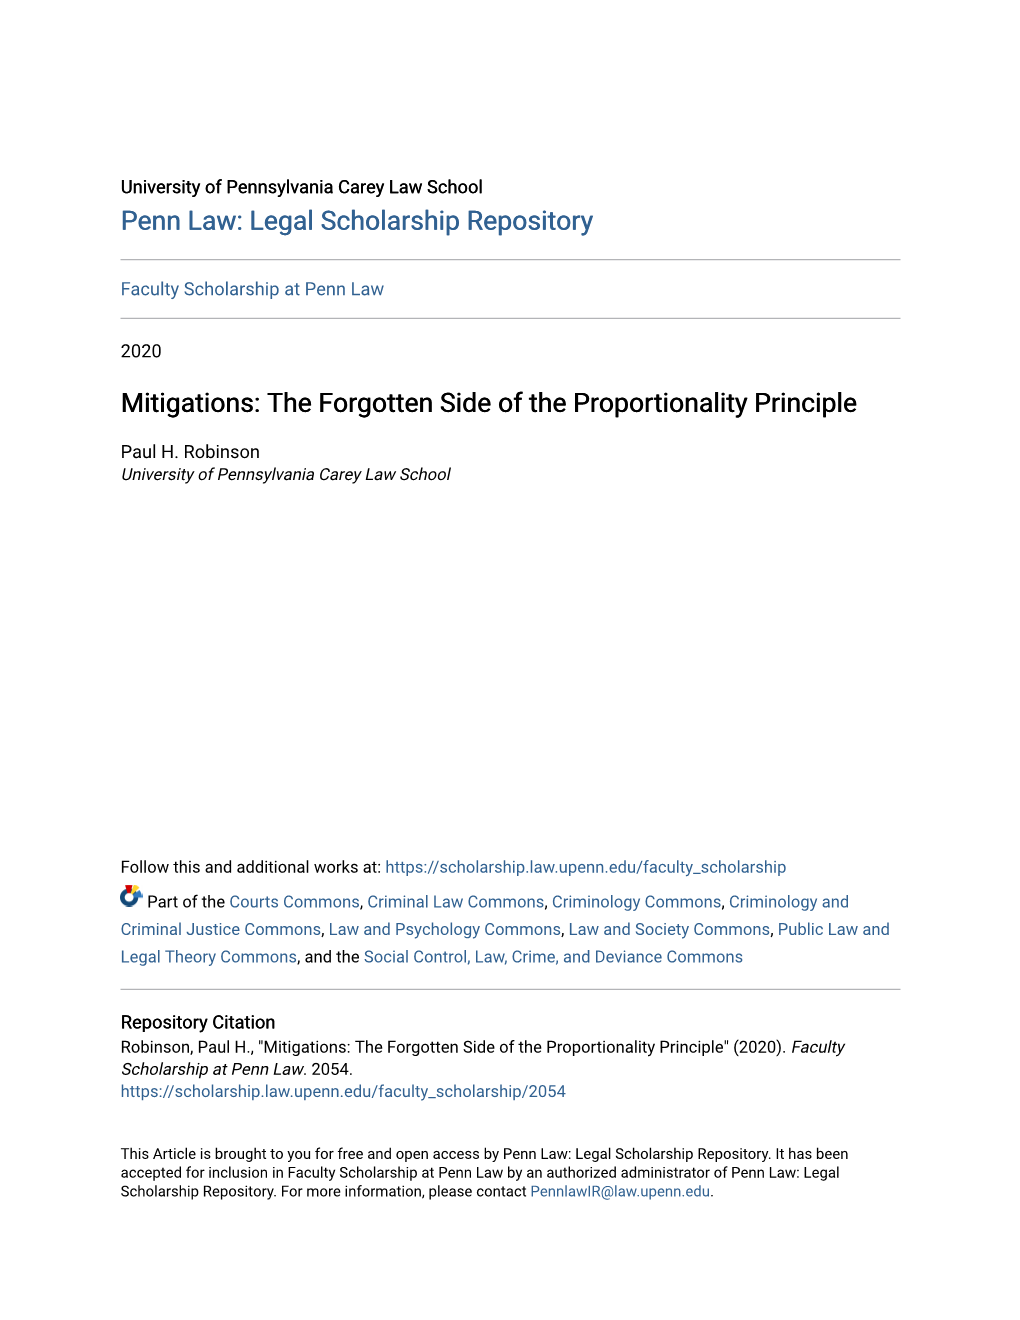 Mitigations: the Forgotten Side of the Proportionality Principle